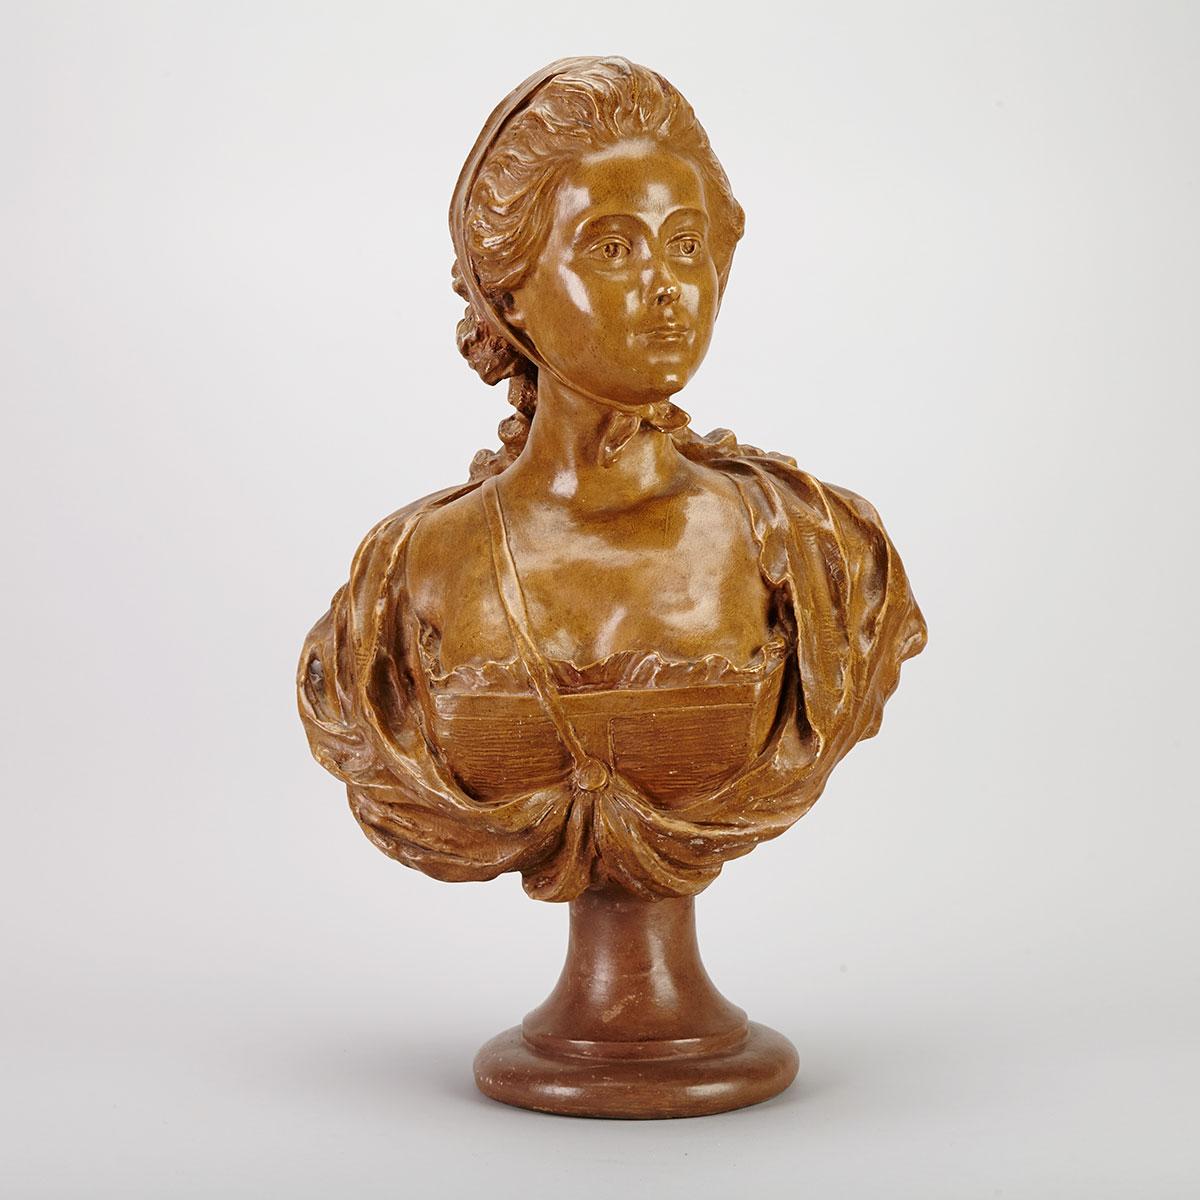 Painted Plaster Bust of a French Court Beauty, early 20th century